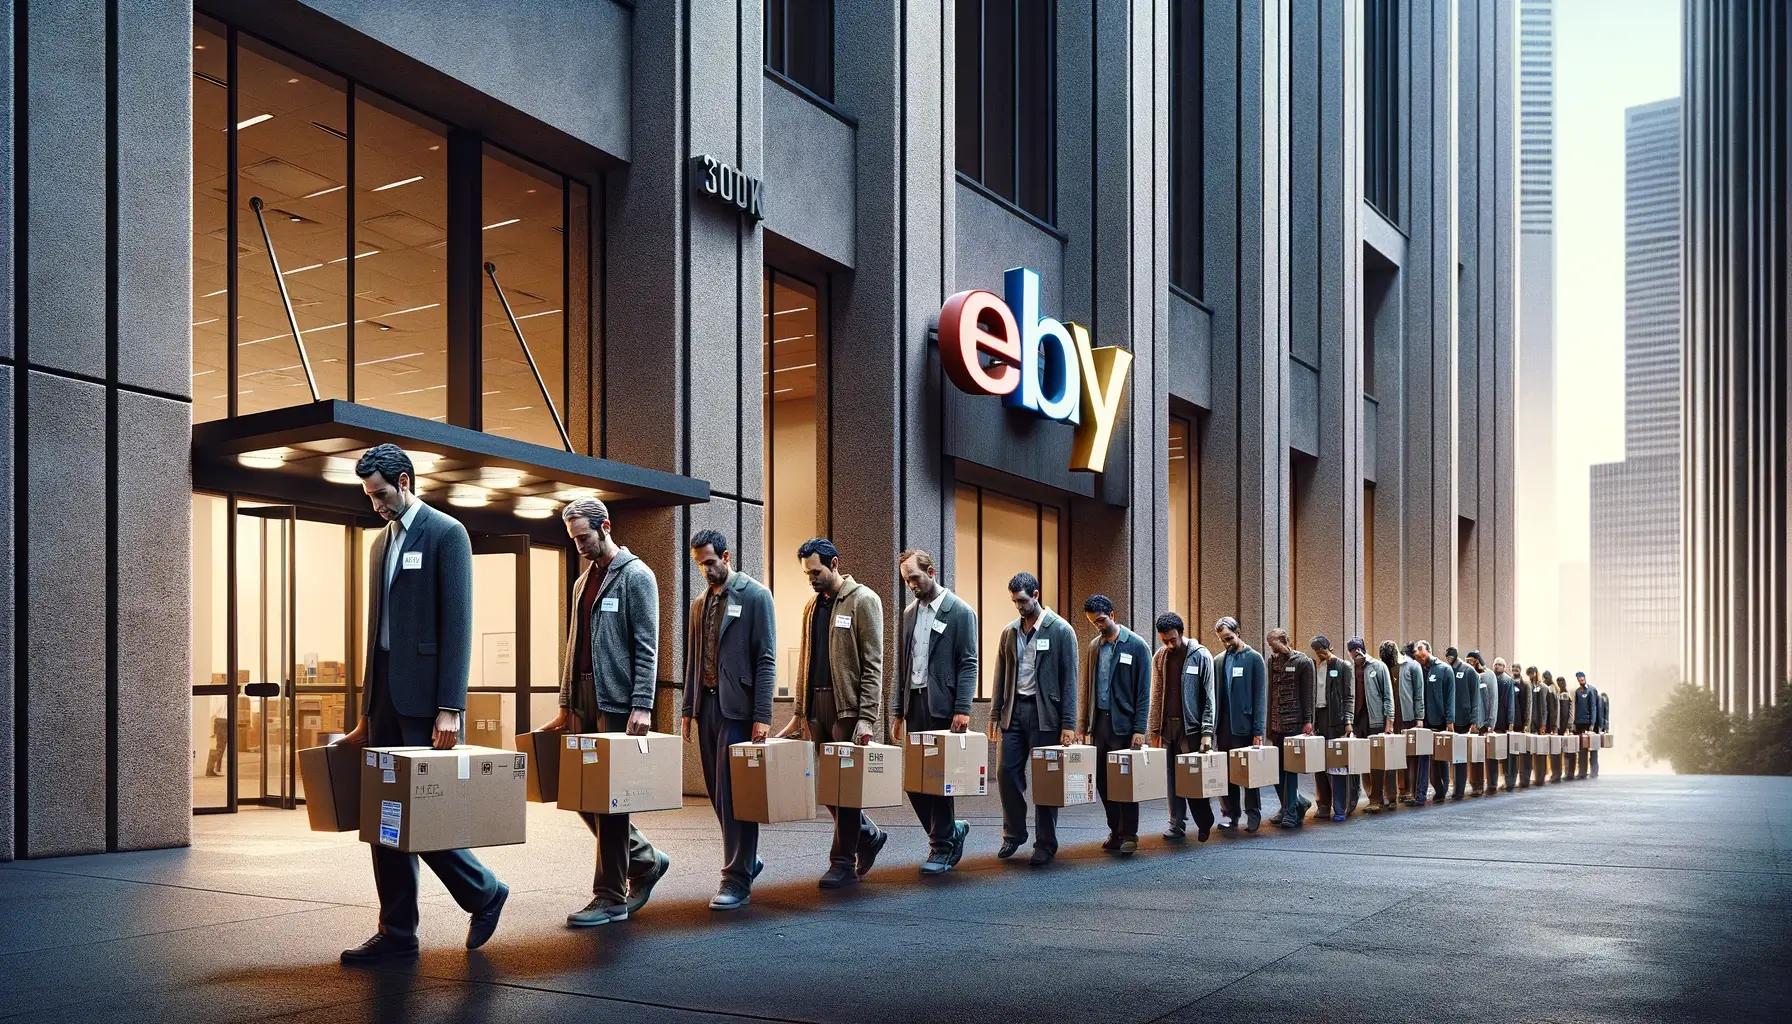 eBay to Depart NFT Sector with 30% in Web3 Staff Reduction